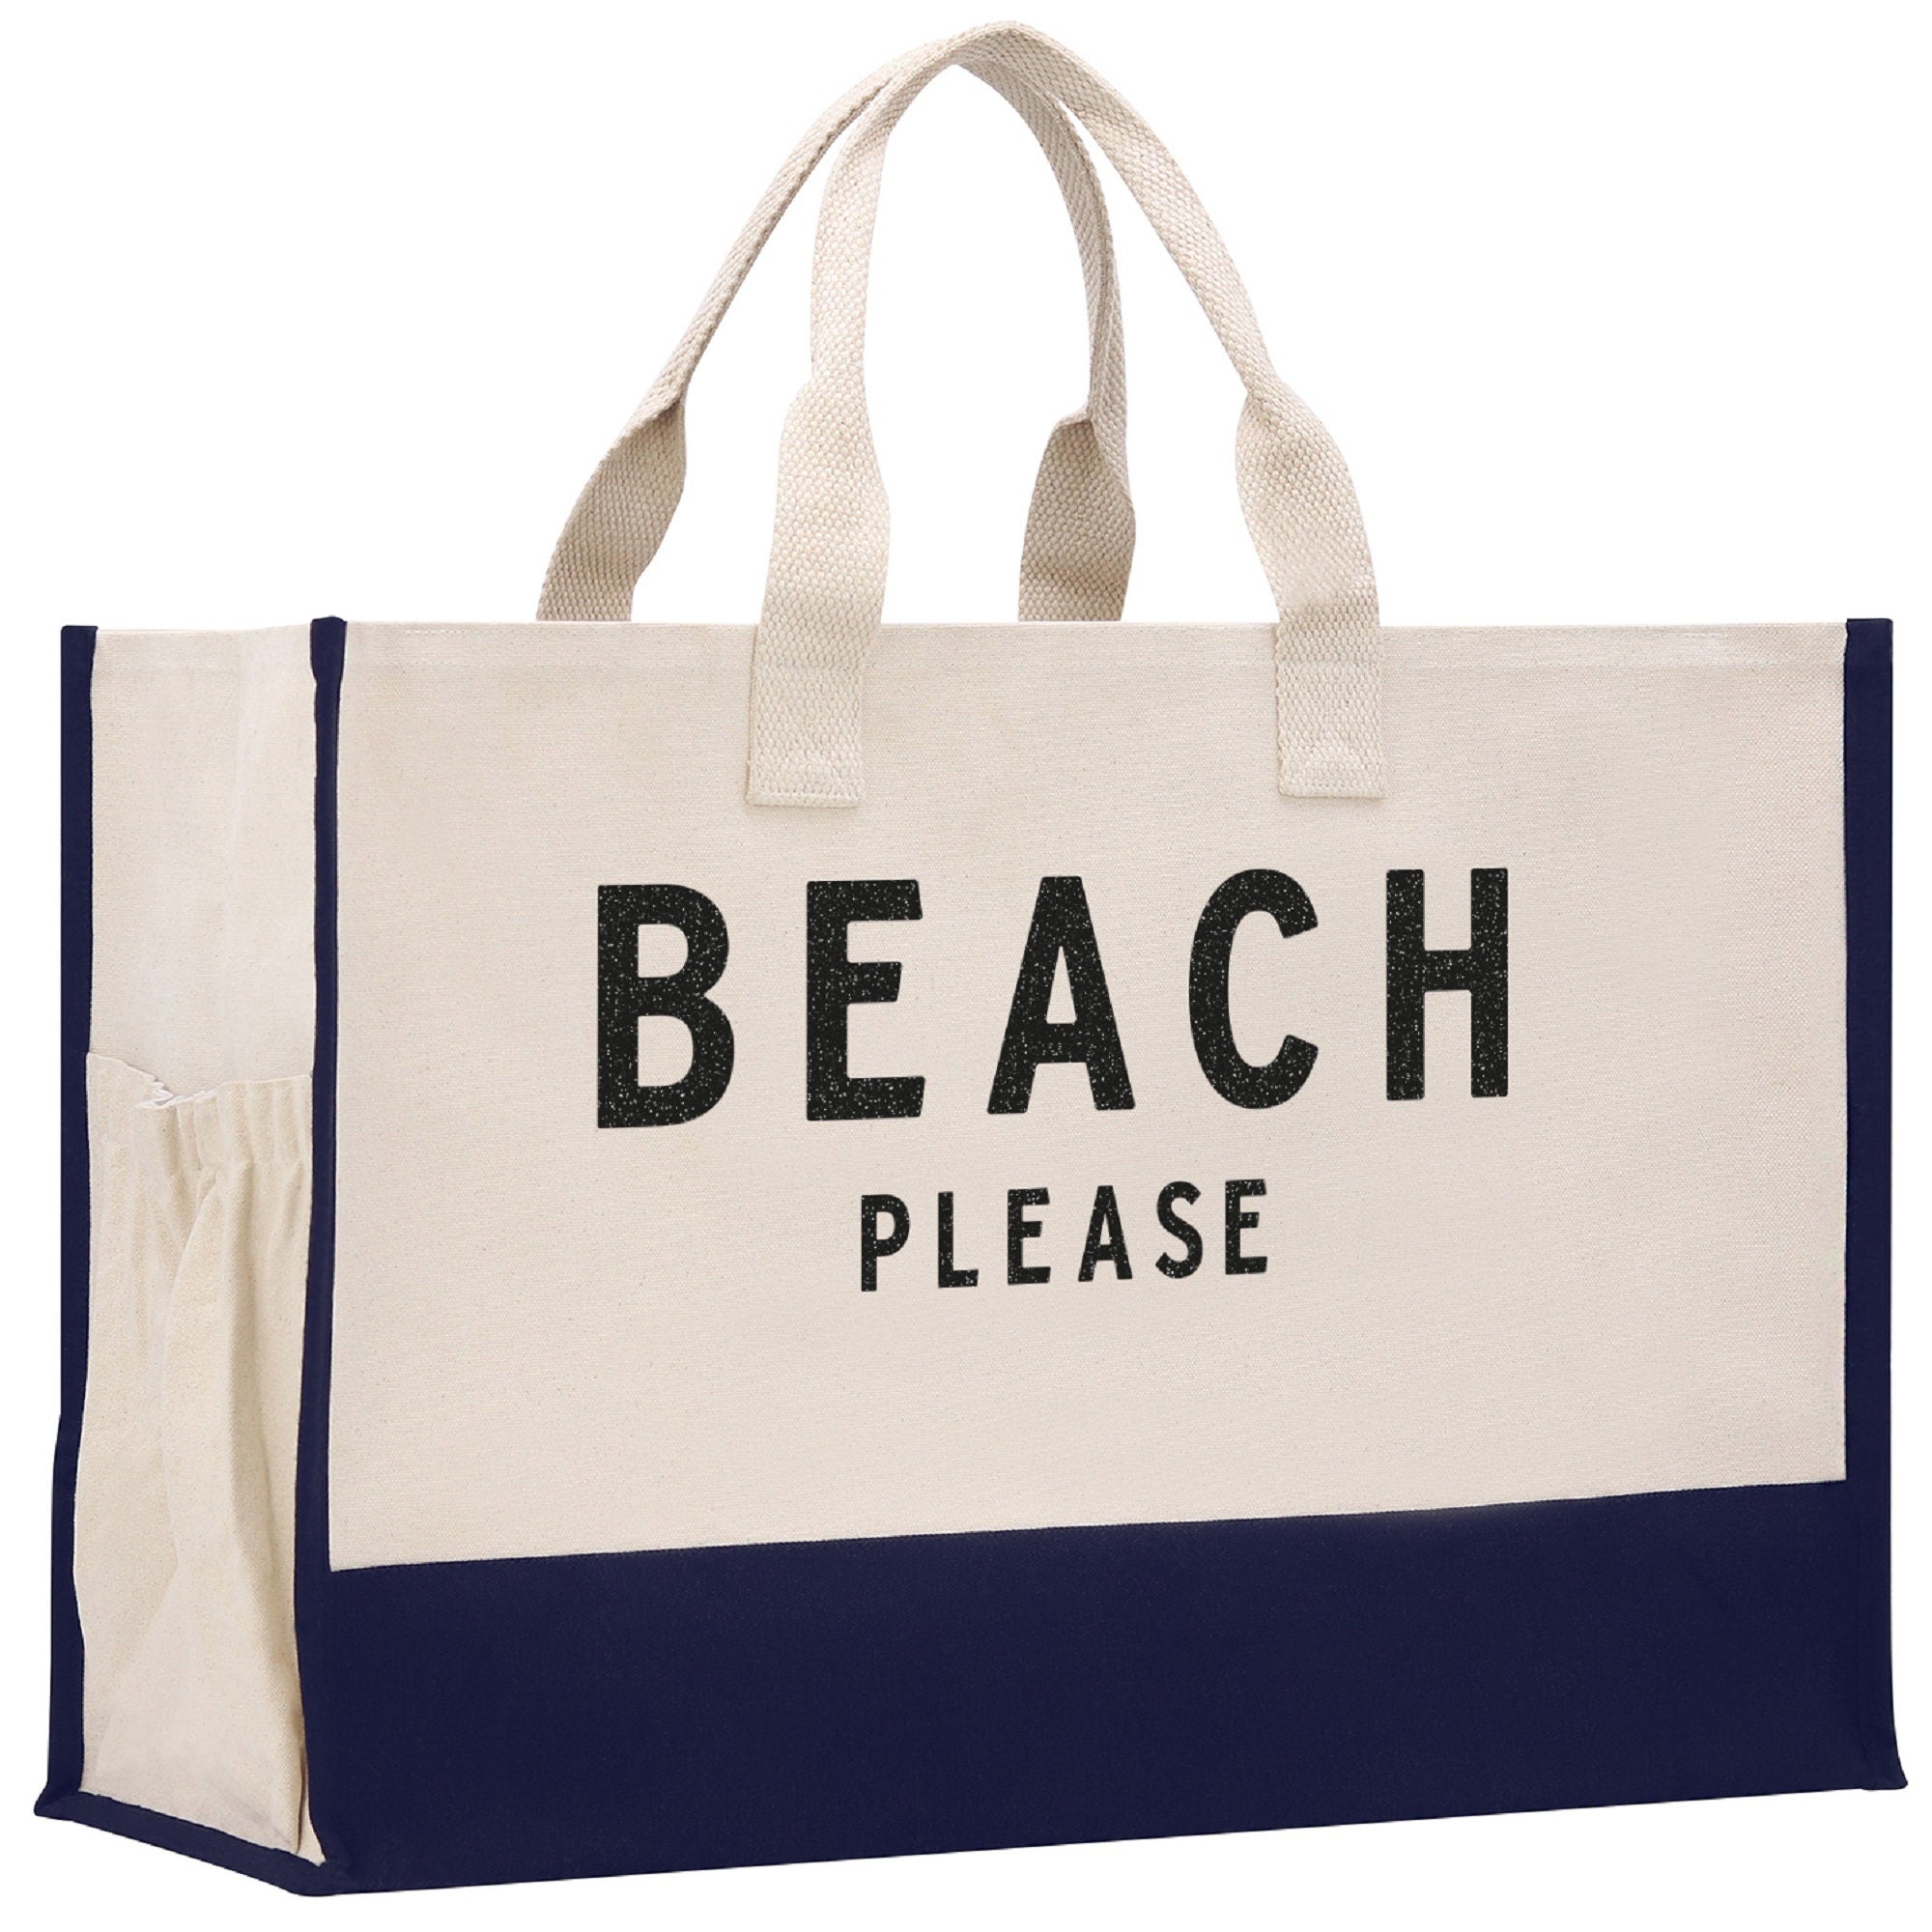 Beach Please Tote Bag XL - Oversized Chic Tote Bag with Zipper and Inner Pocket - Beach Bag for Women - Beach Tote - Gift for Her - Gift Bag